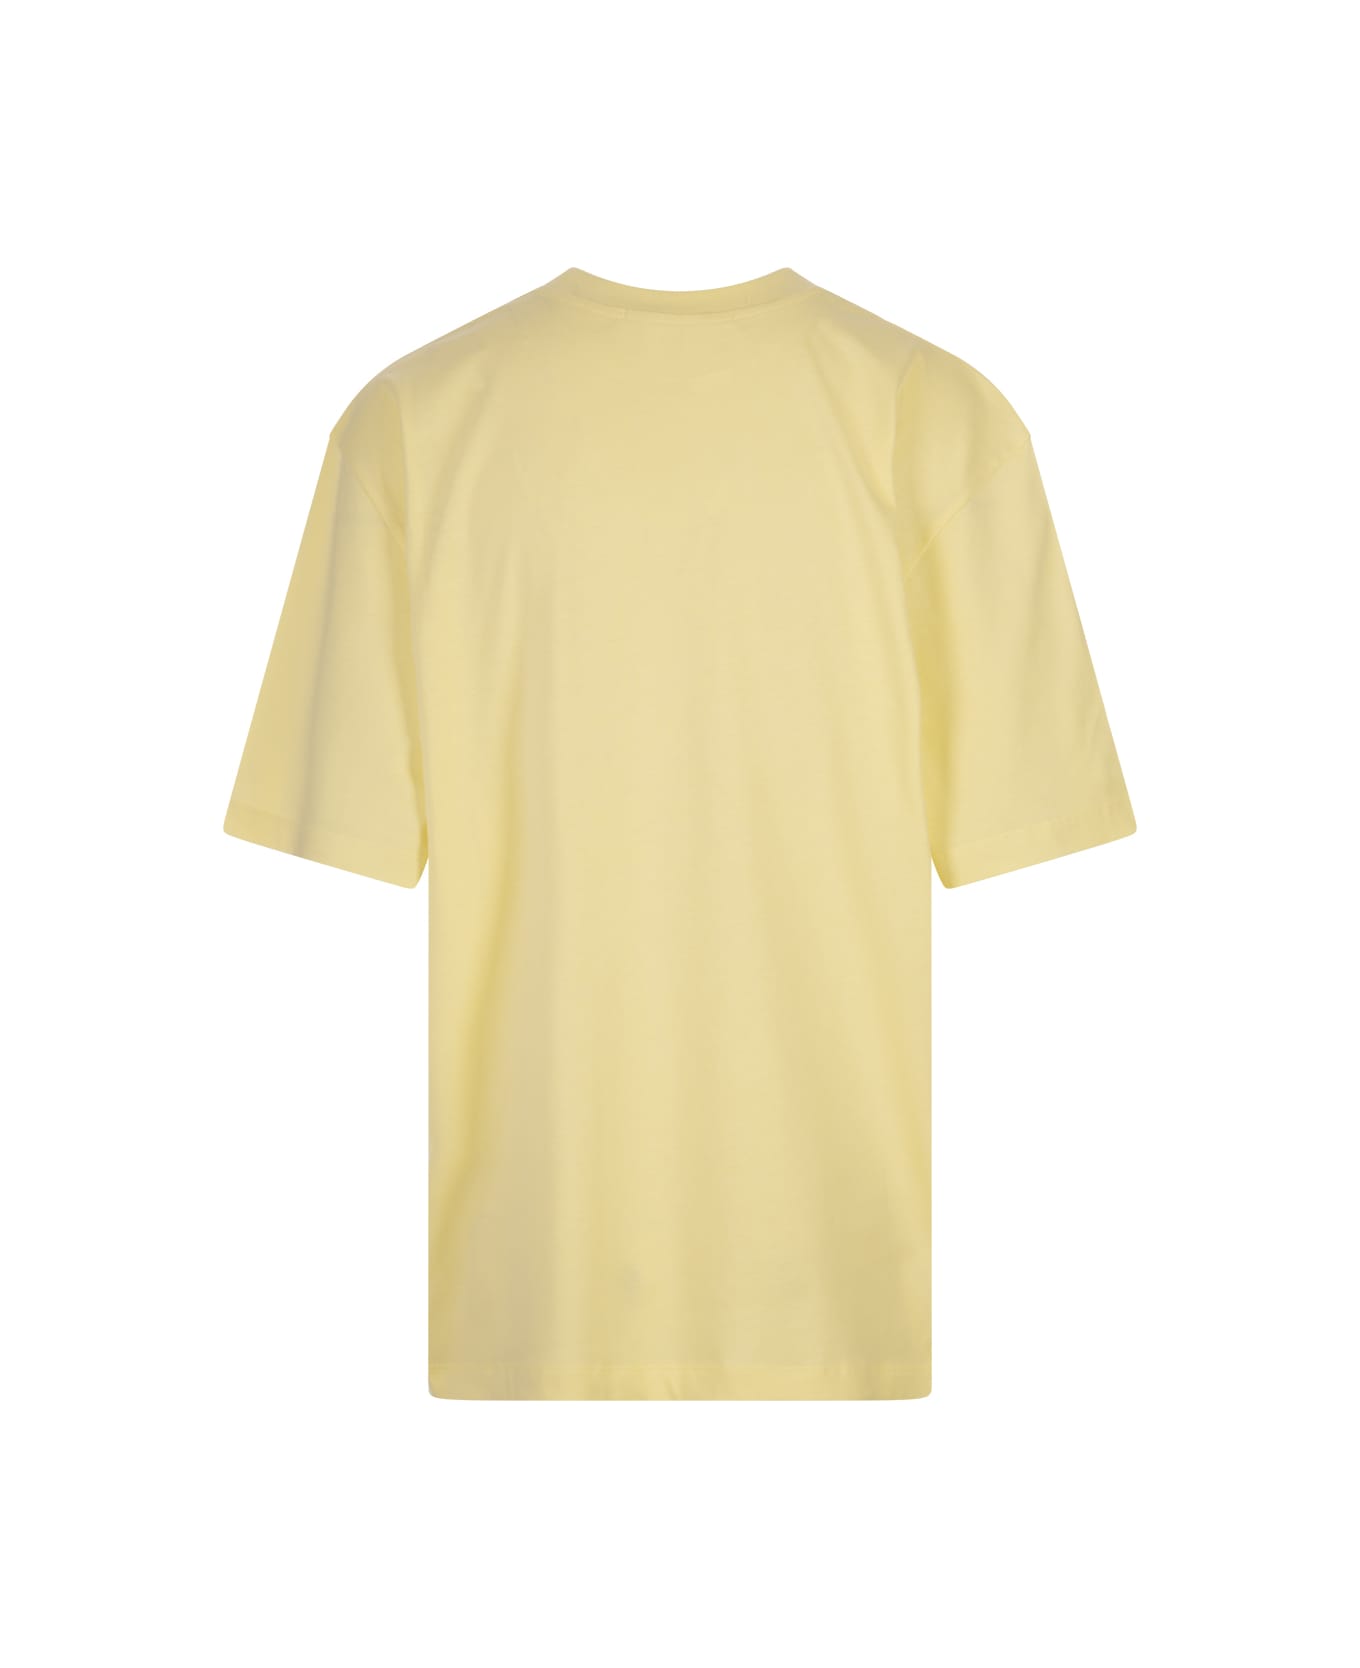 MSGM Yellow T-shirt With Floral College Logo - Yellow